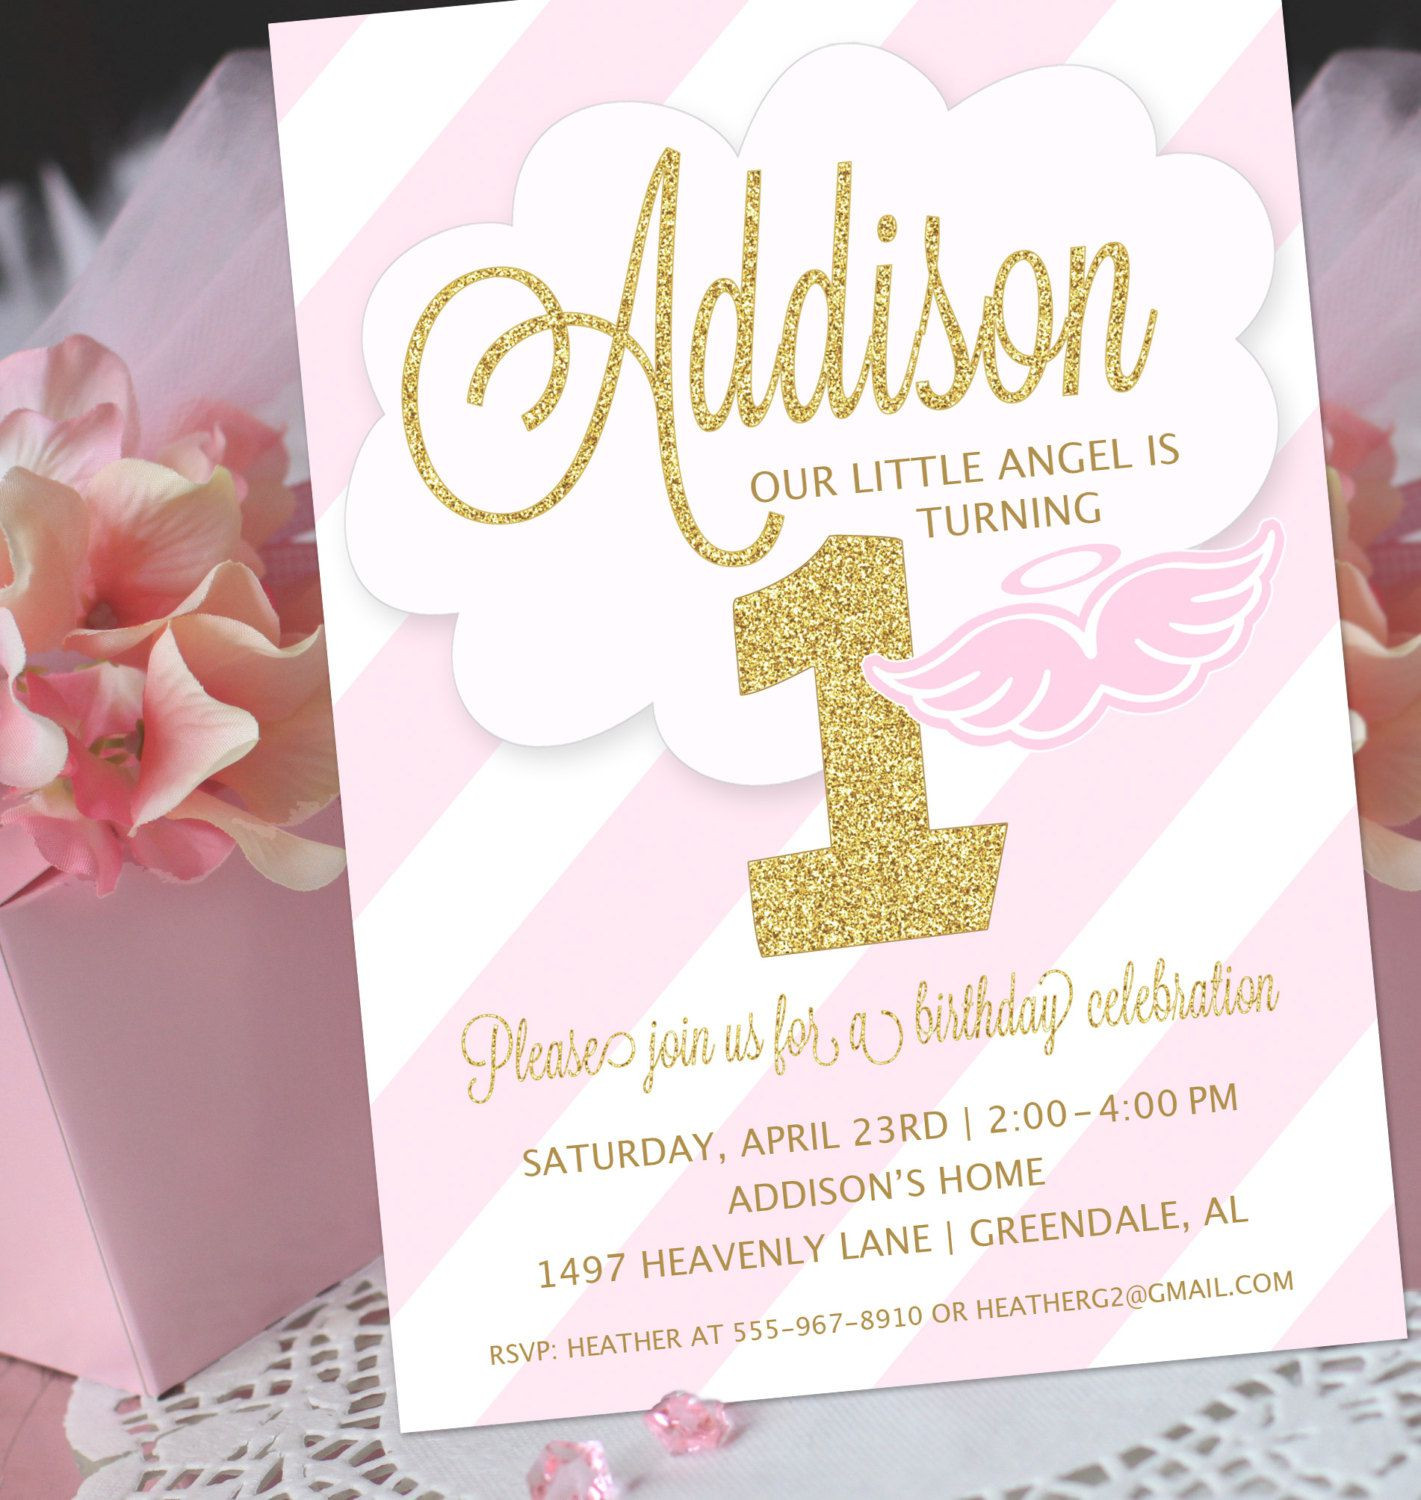 1St Birthday And Baptism Combined Invitations
 1st Birthday And Baptism Invitations 1st Birthday And